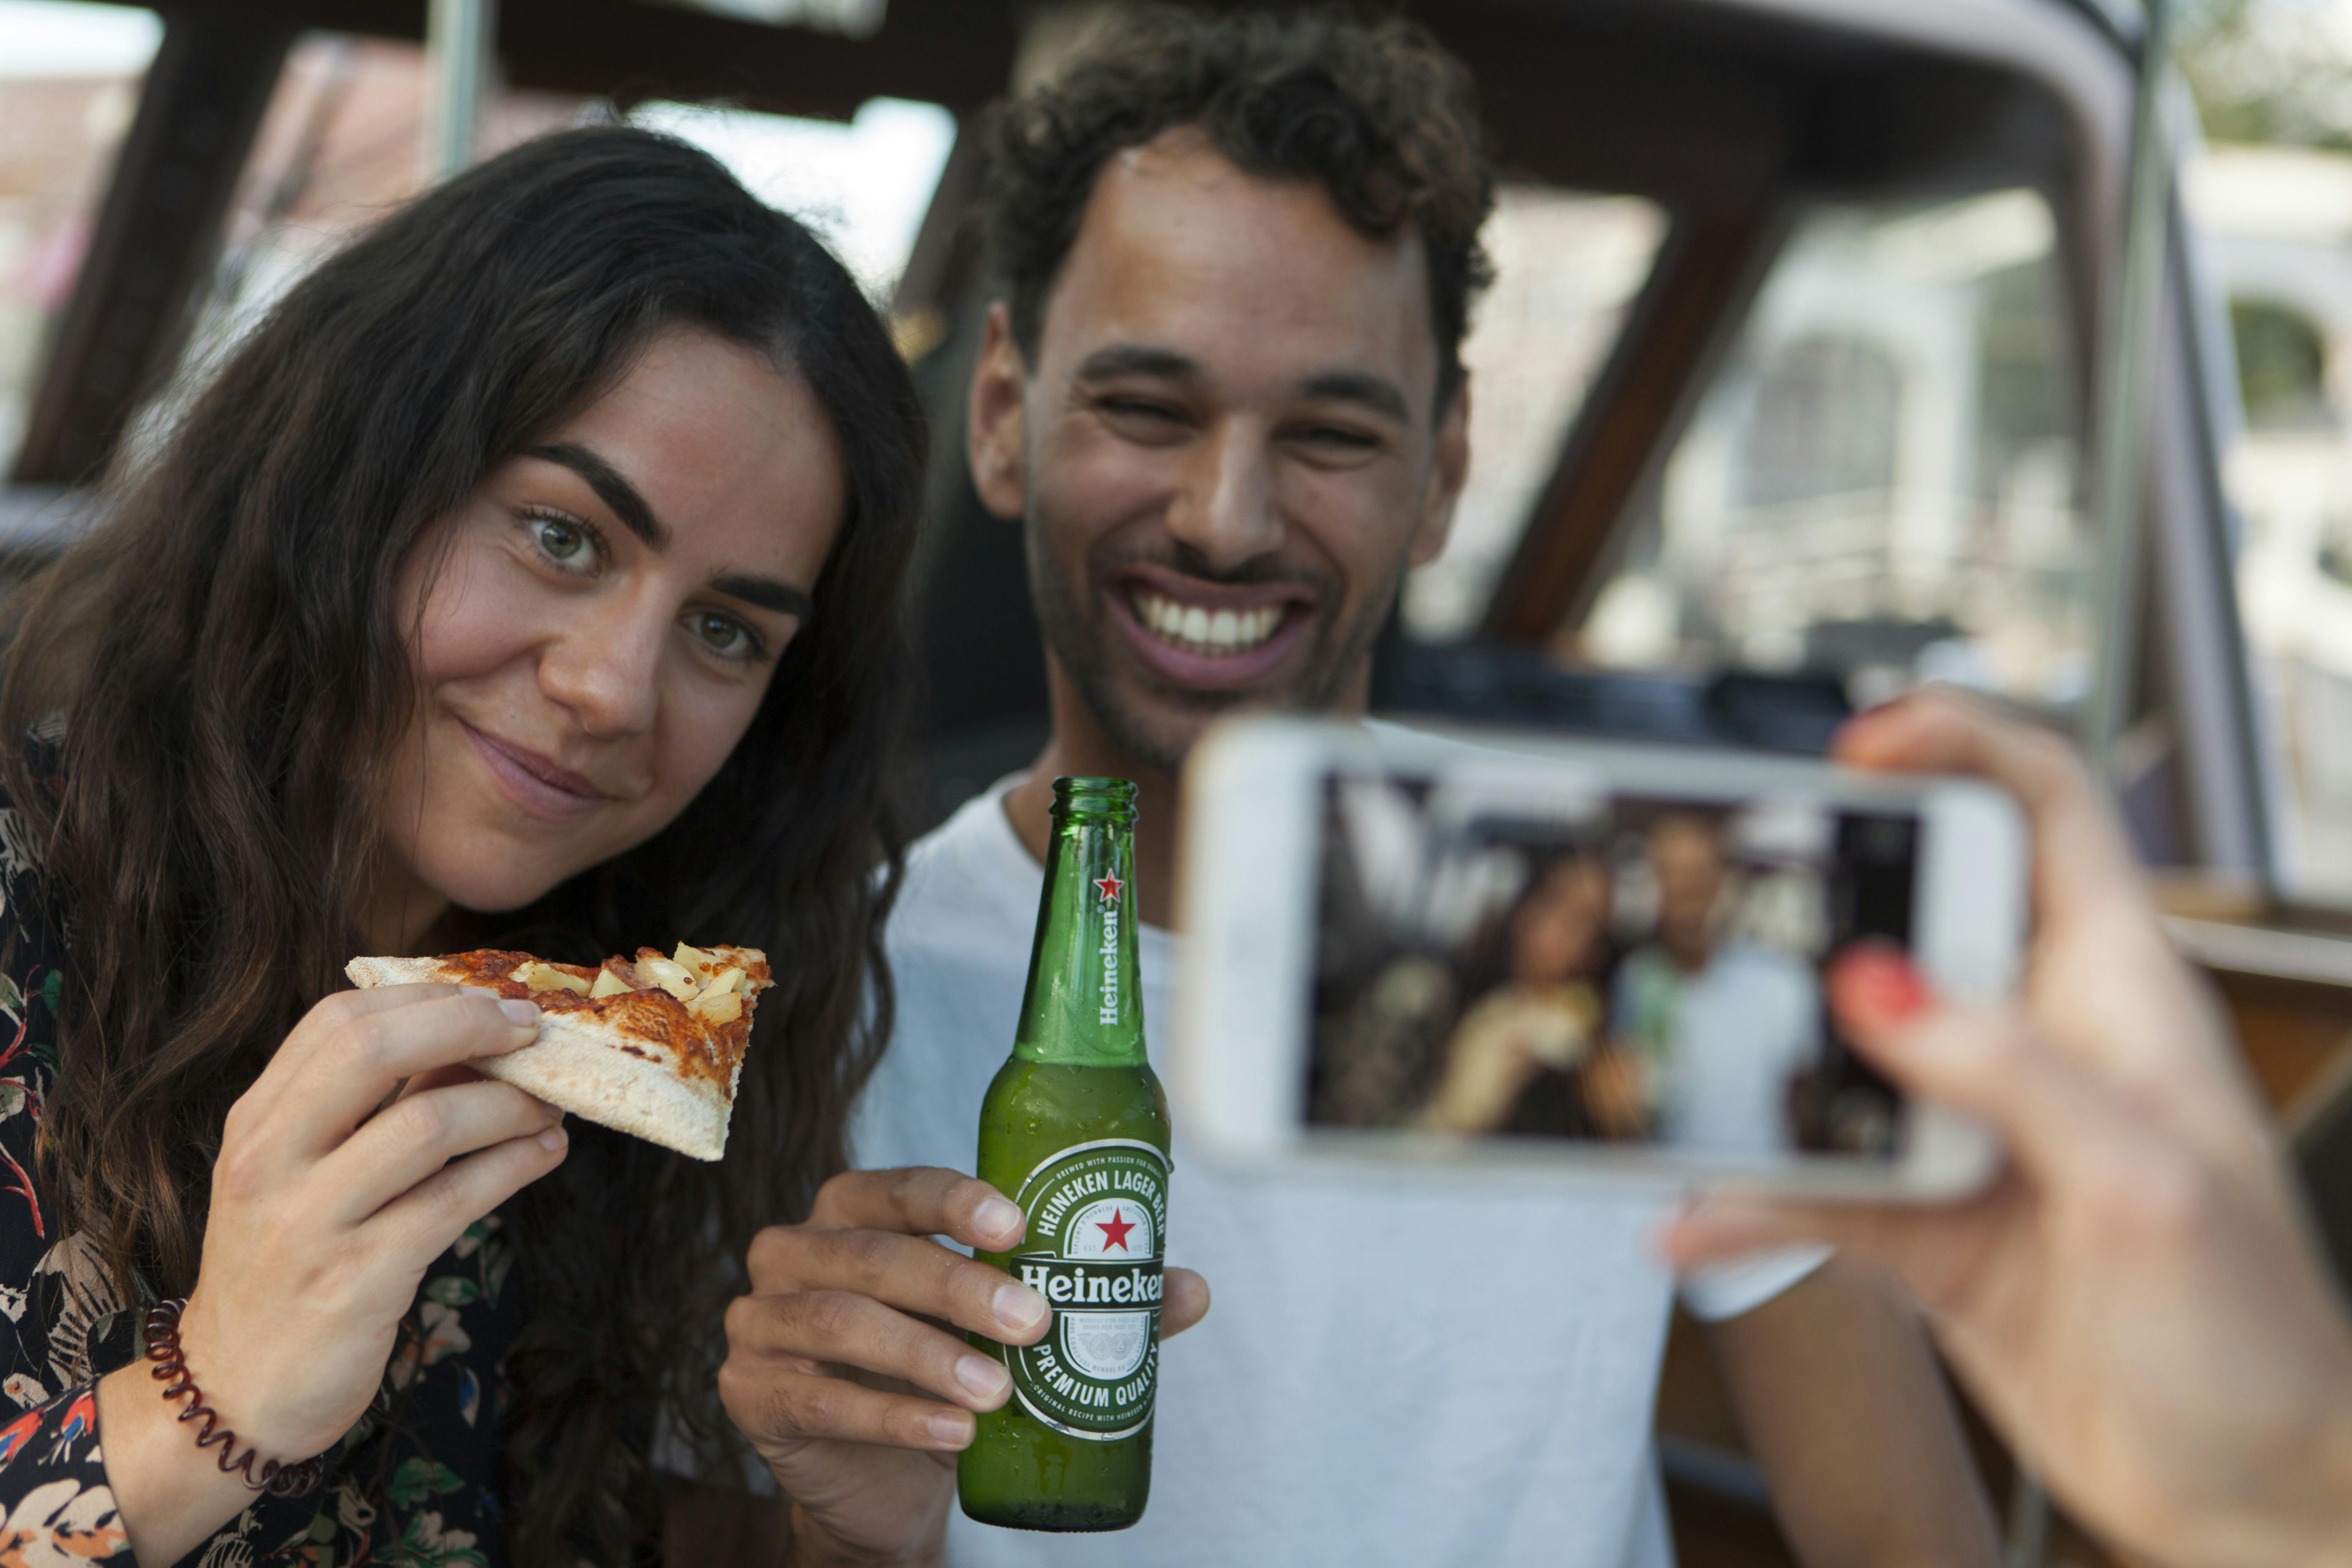 CTA Pizza Cruise_Selfie with pizza and beer.jpg